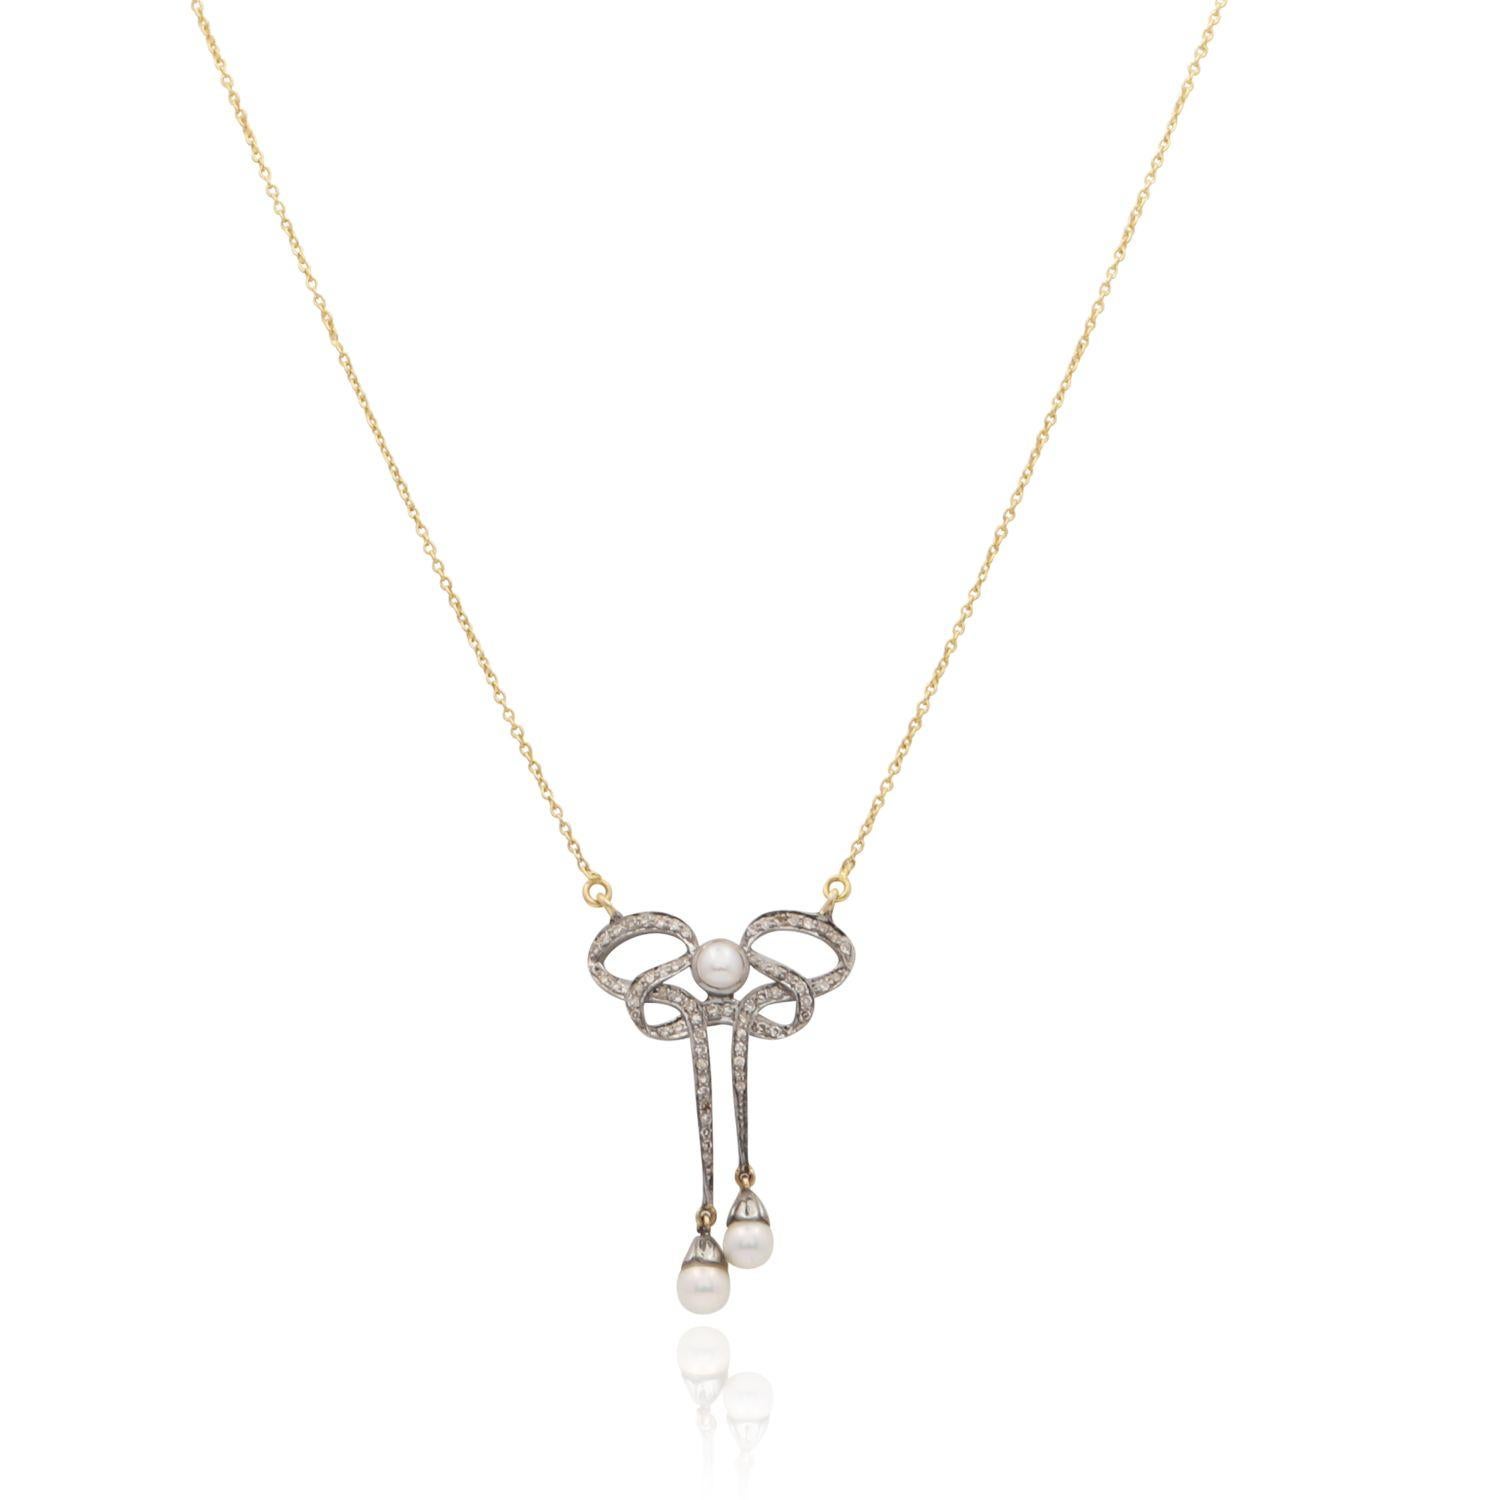 A fashionable vintage inspired dainty necklace, taking one back to the 17th century right through the 1920’s.

Bows are ancient symbols of strength, unions, ties that bind, loyalty and beauty; love and marriage. The bow motif is said to have first